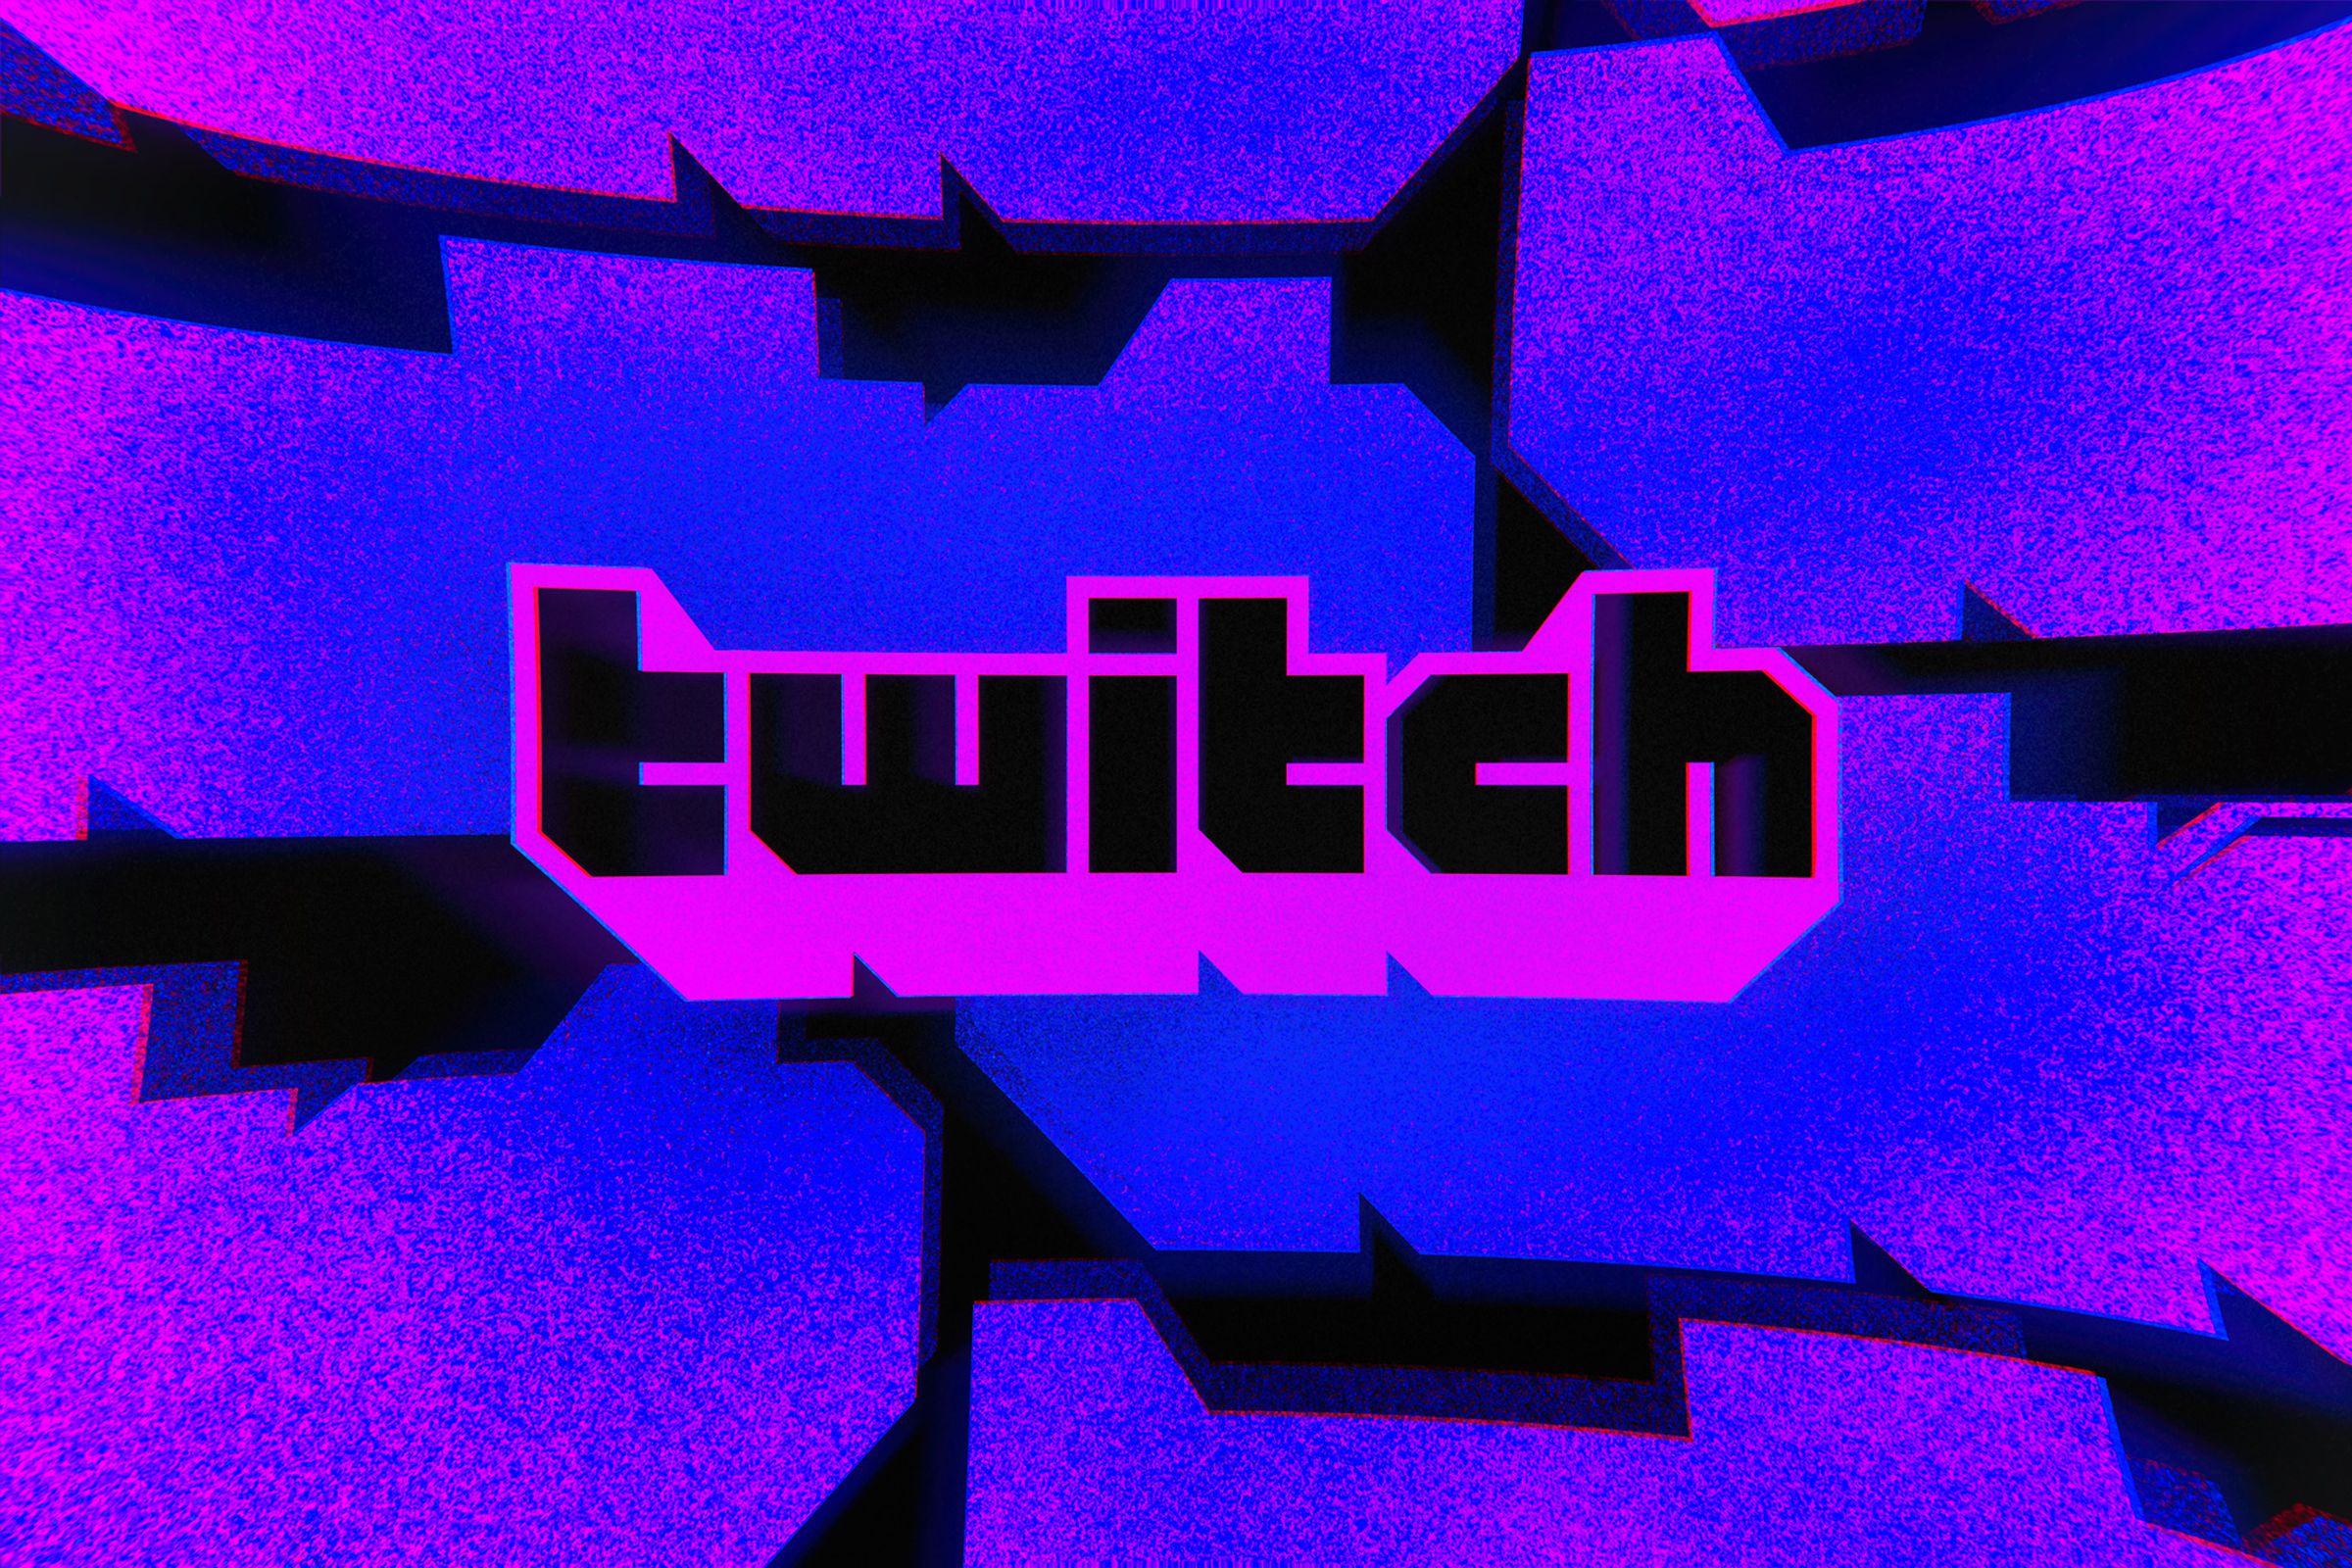 An illustration of the Twitch logo in front of filled-in Twitch logos.